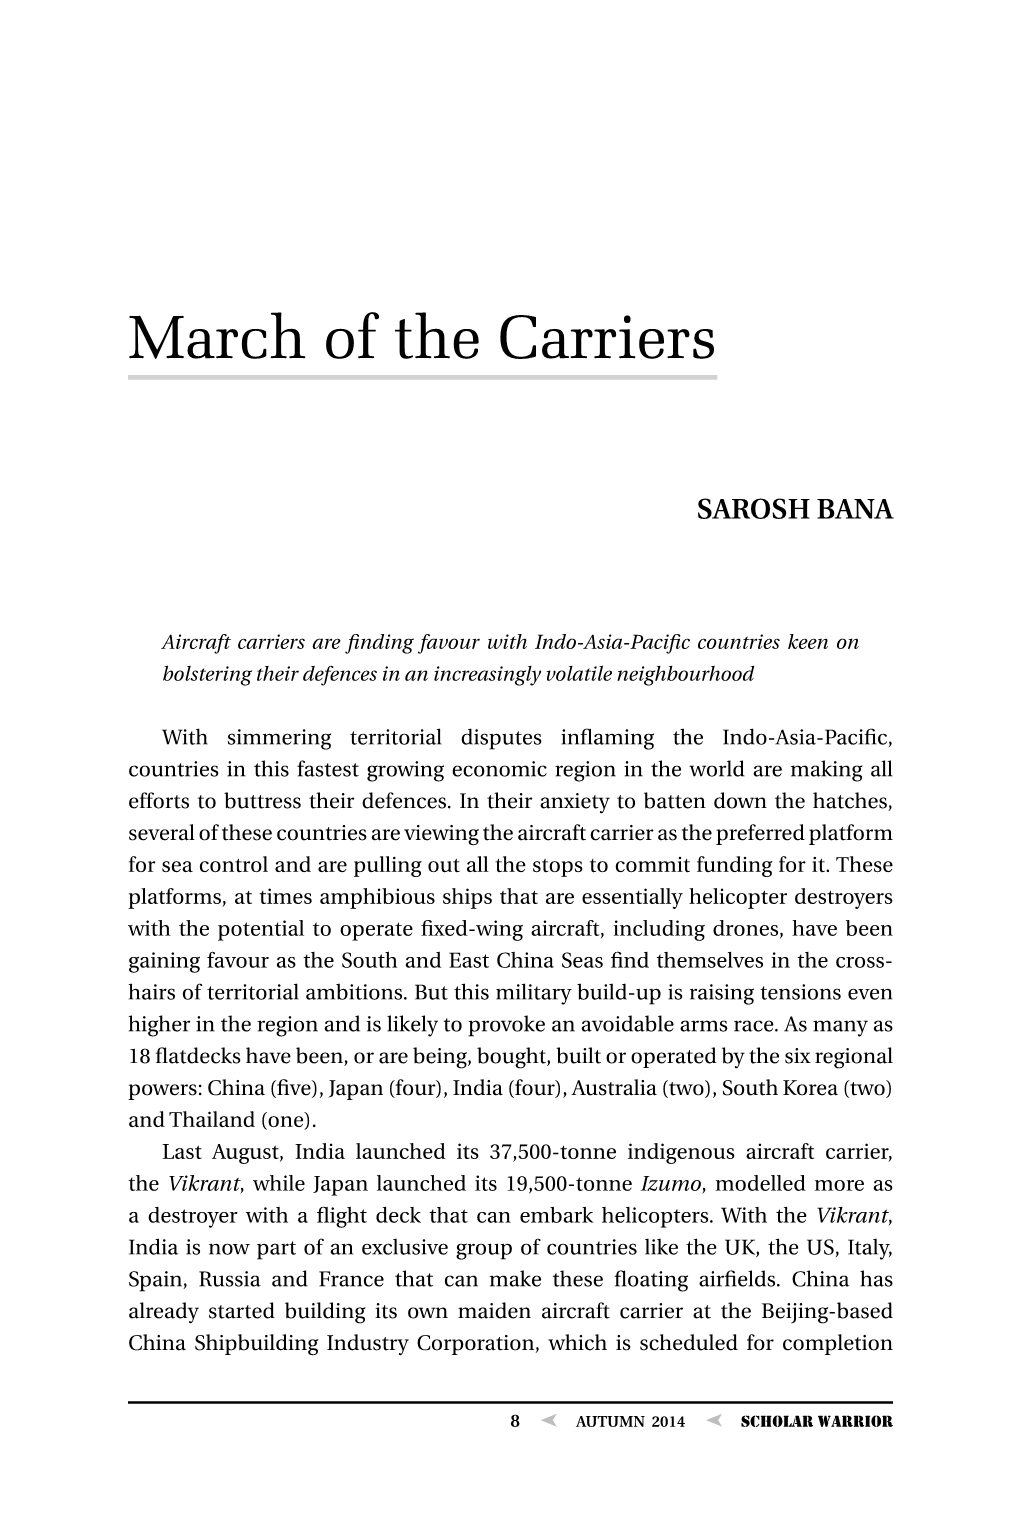 March of the Carriers, by Sarosh Bana